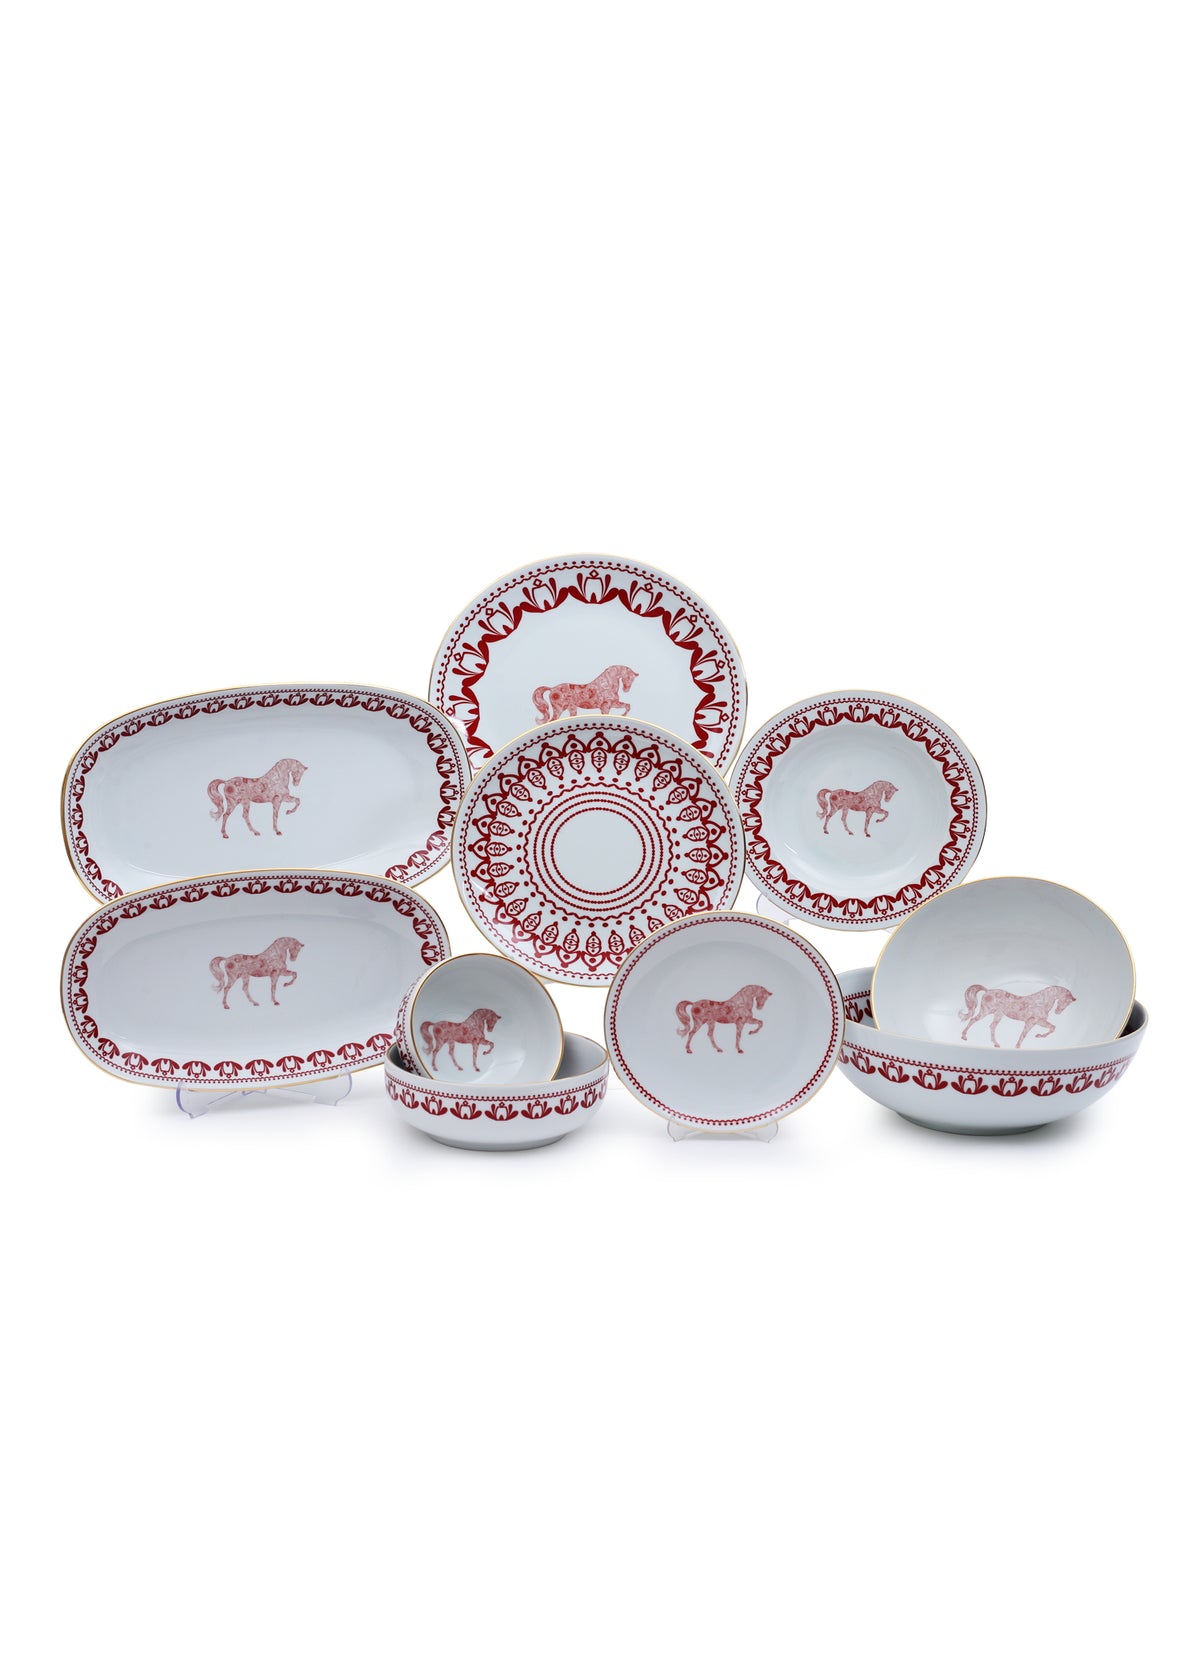 Horse Luck Collection-Red Set of 8 Plates (58 pieces)